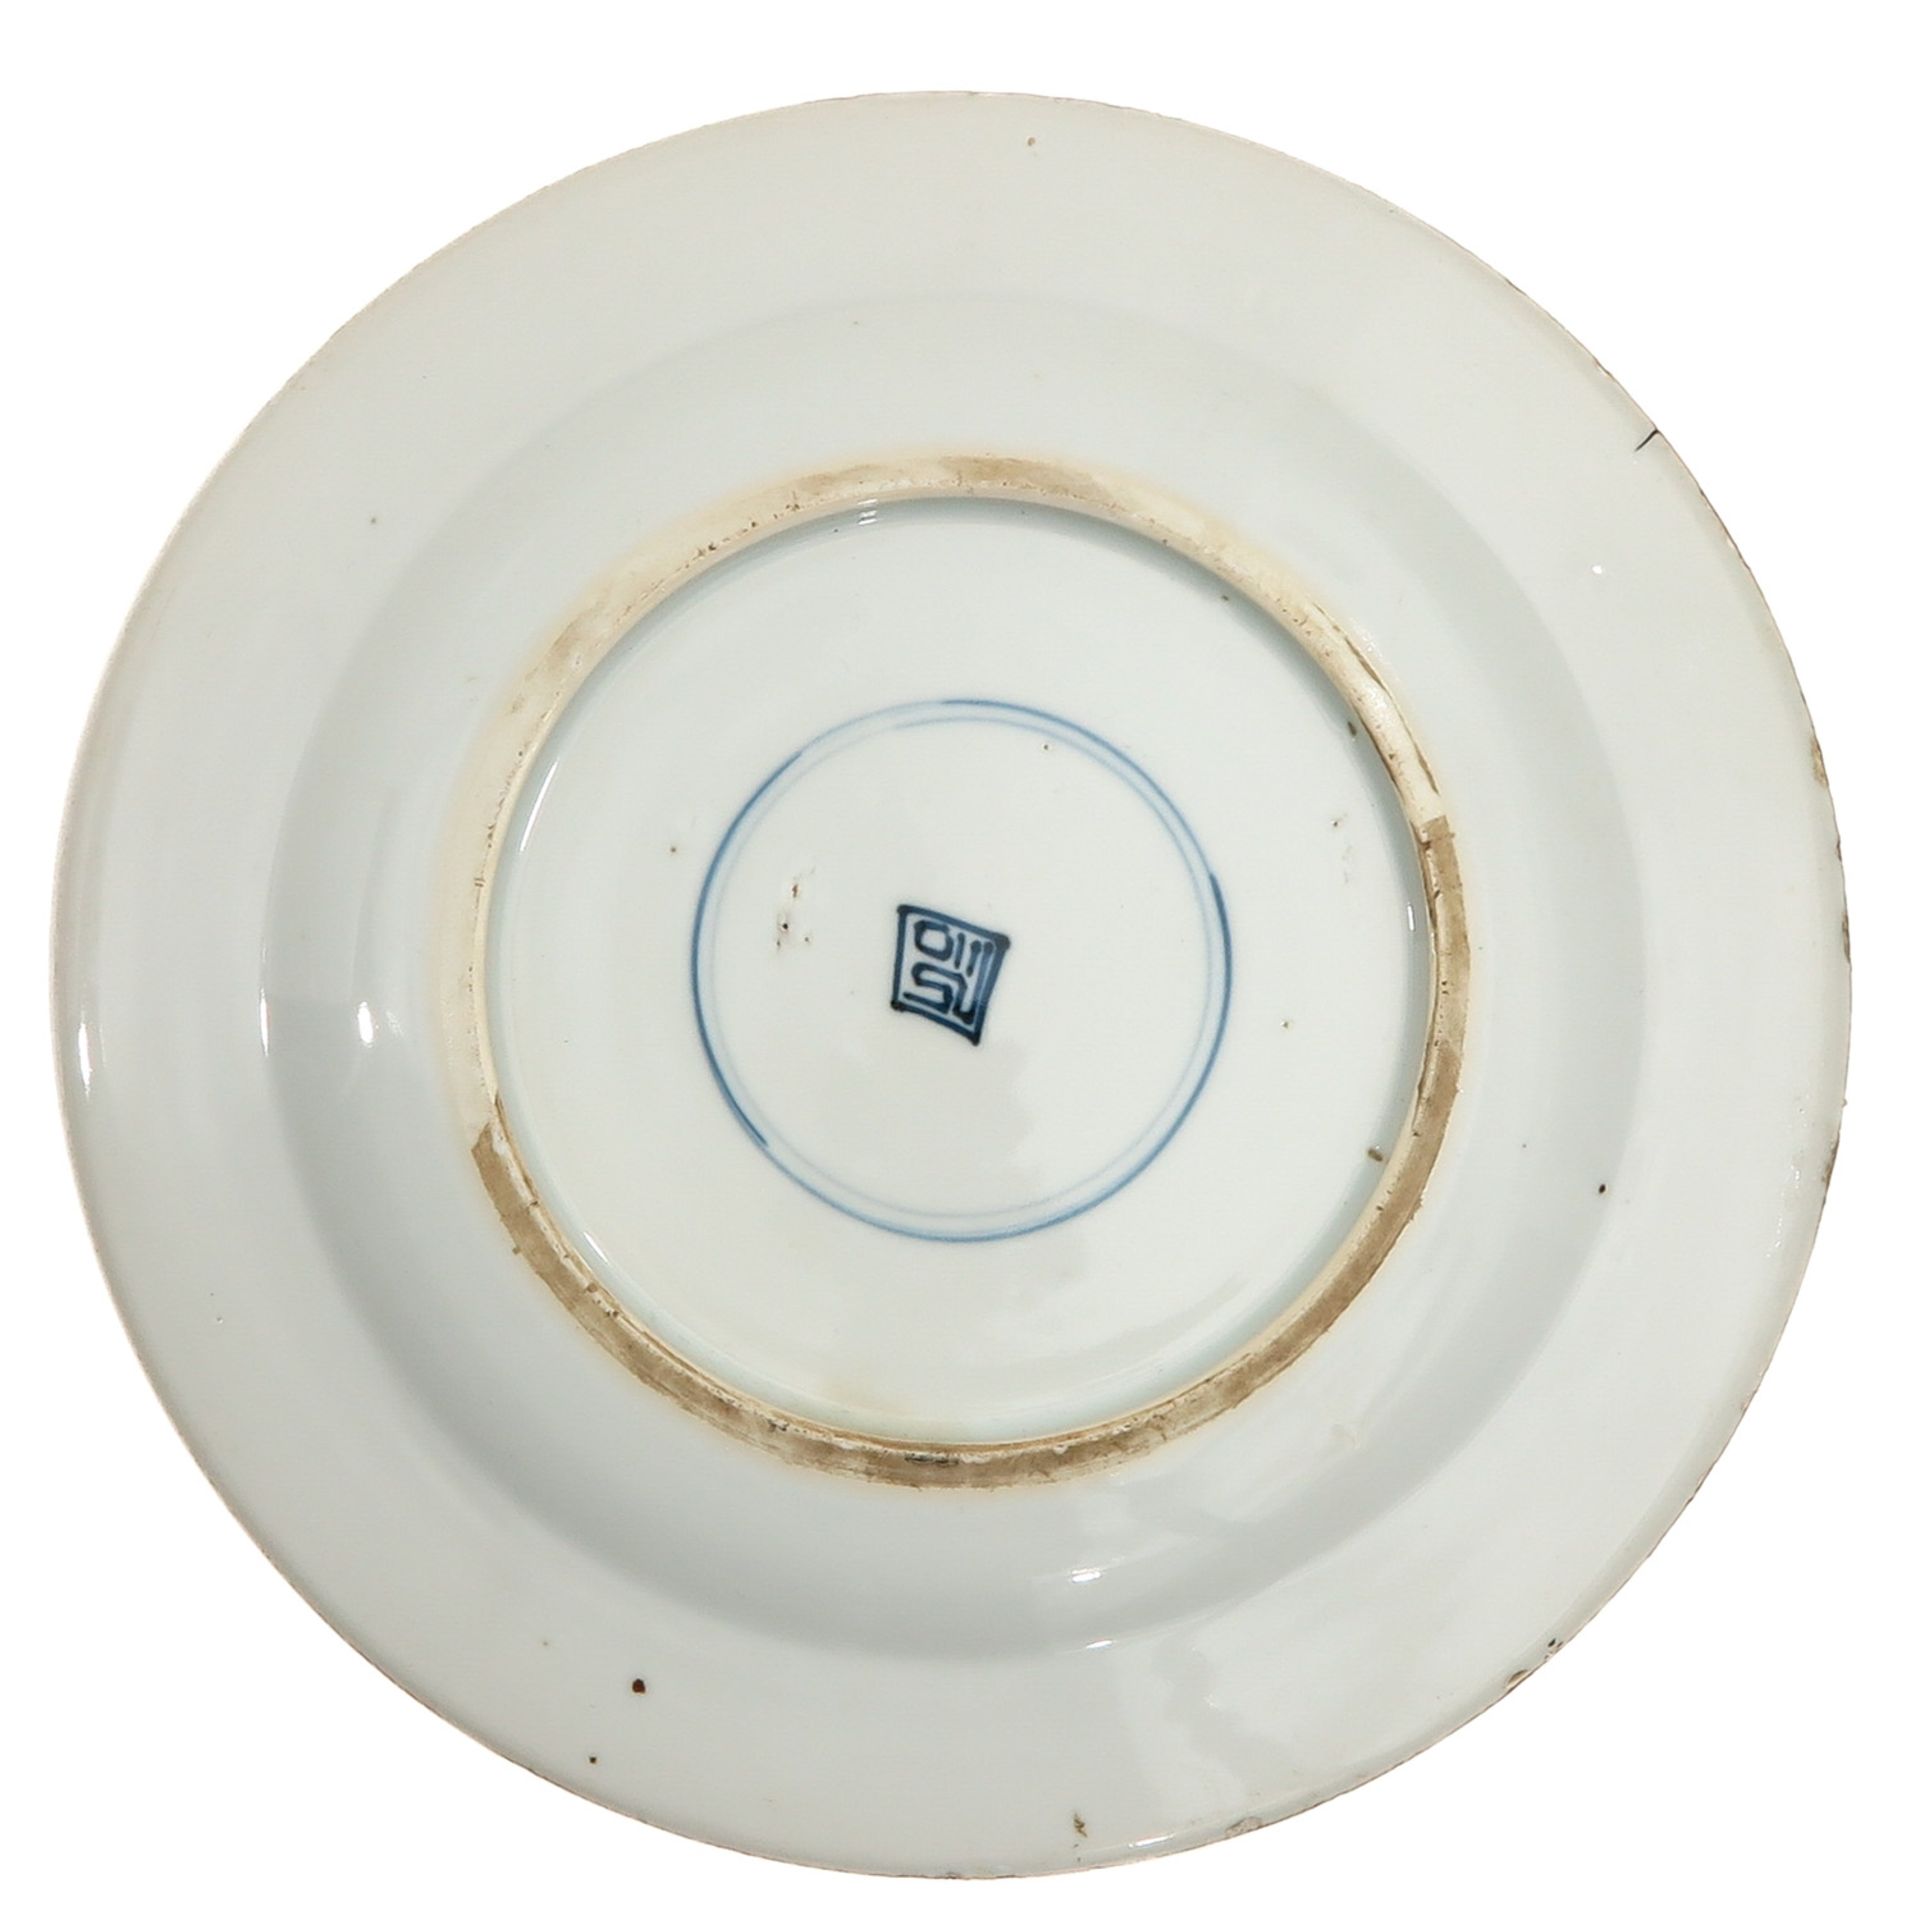 A Blue and White Plate - Image 2 of 6